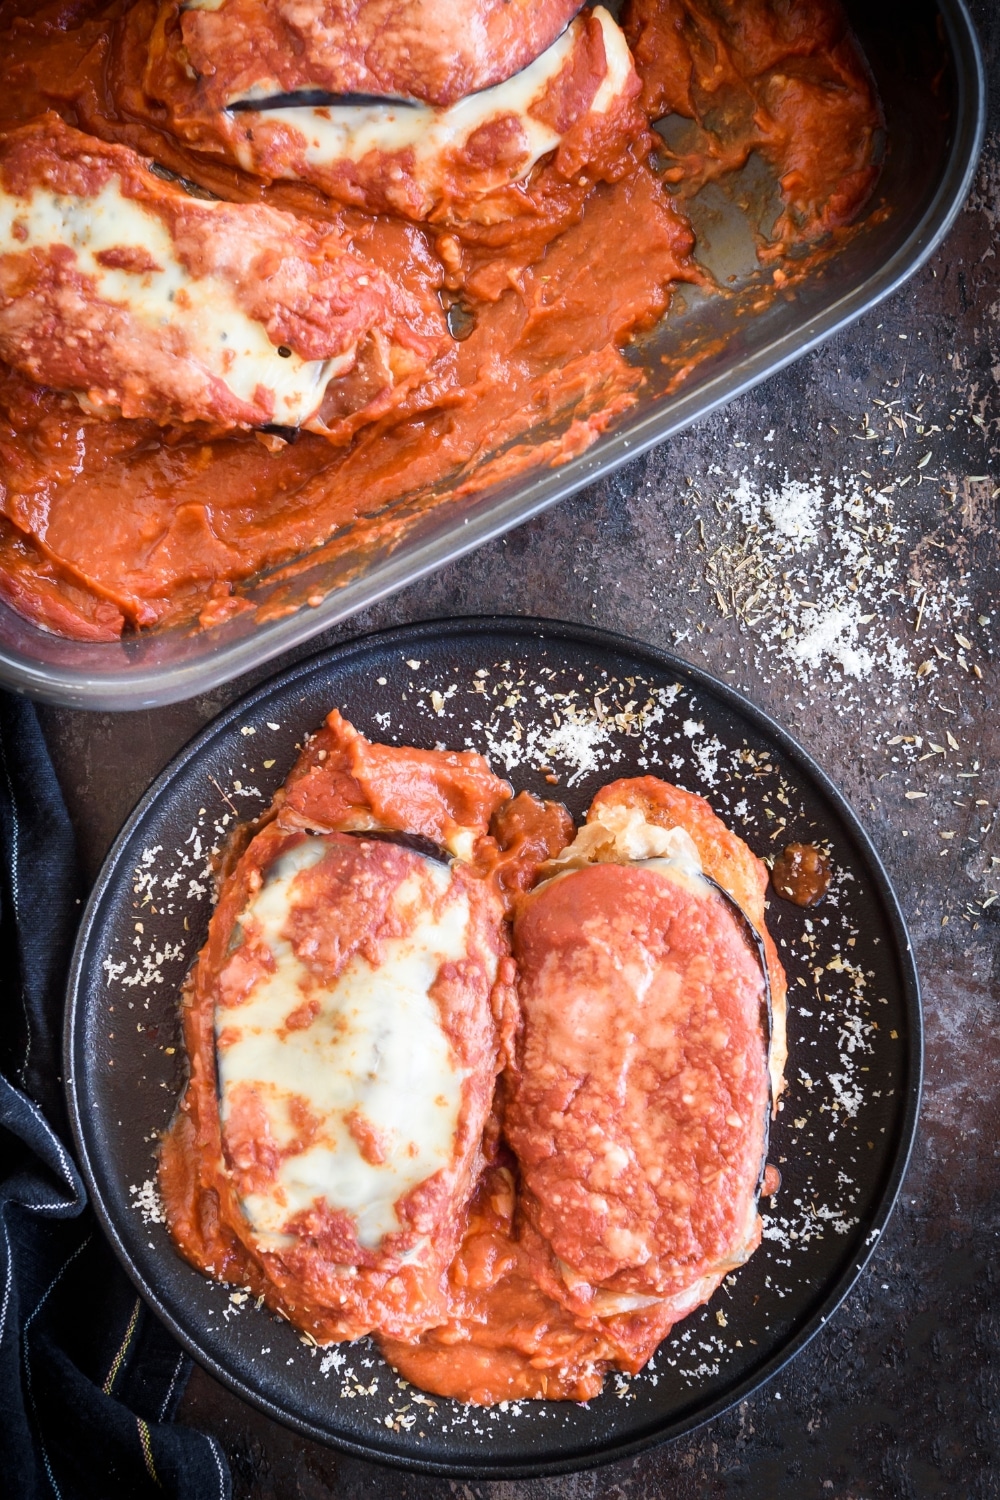 Overhead view of a plate of chicken Sorrentino with two chicken breasts covered in red sauce, sliced eggplant, and melted cheese. Beside the plate of chicken is a baking dish filled with more chicken Sorrentino.